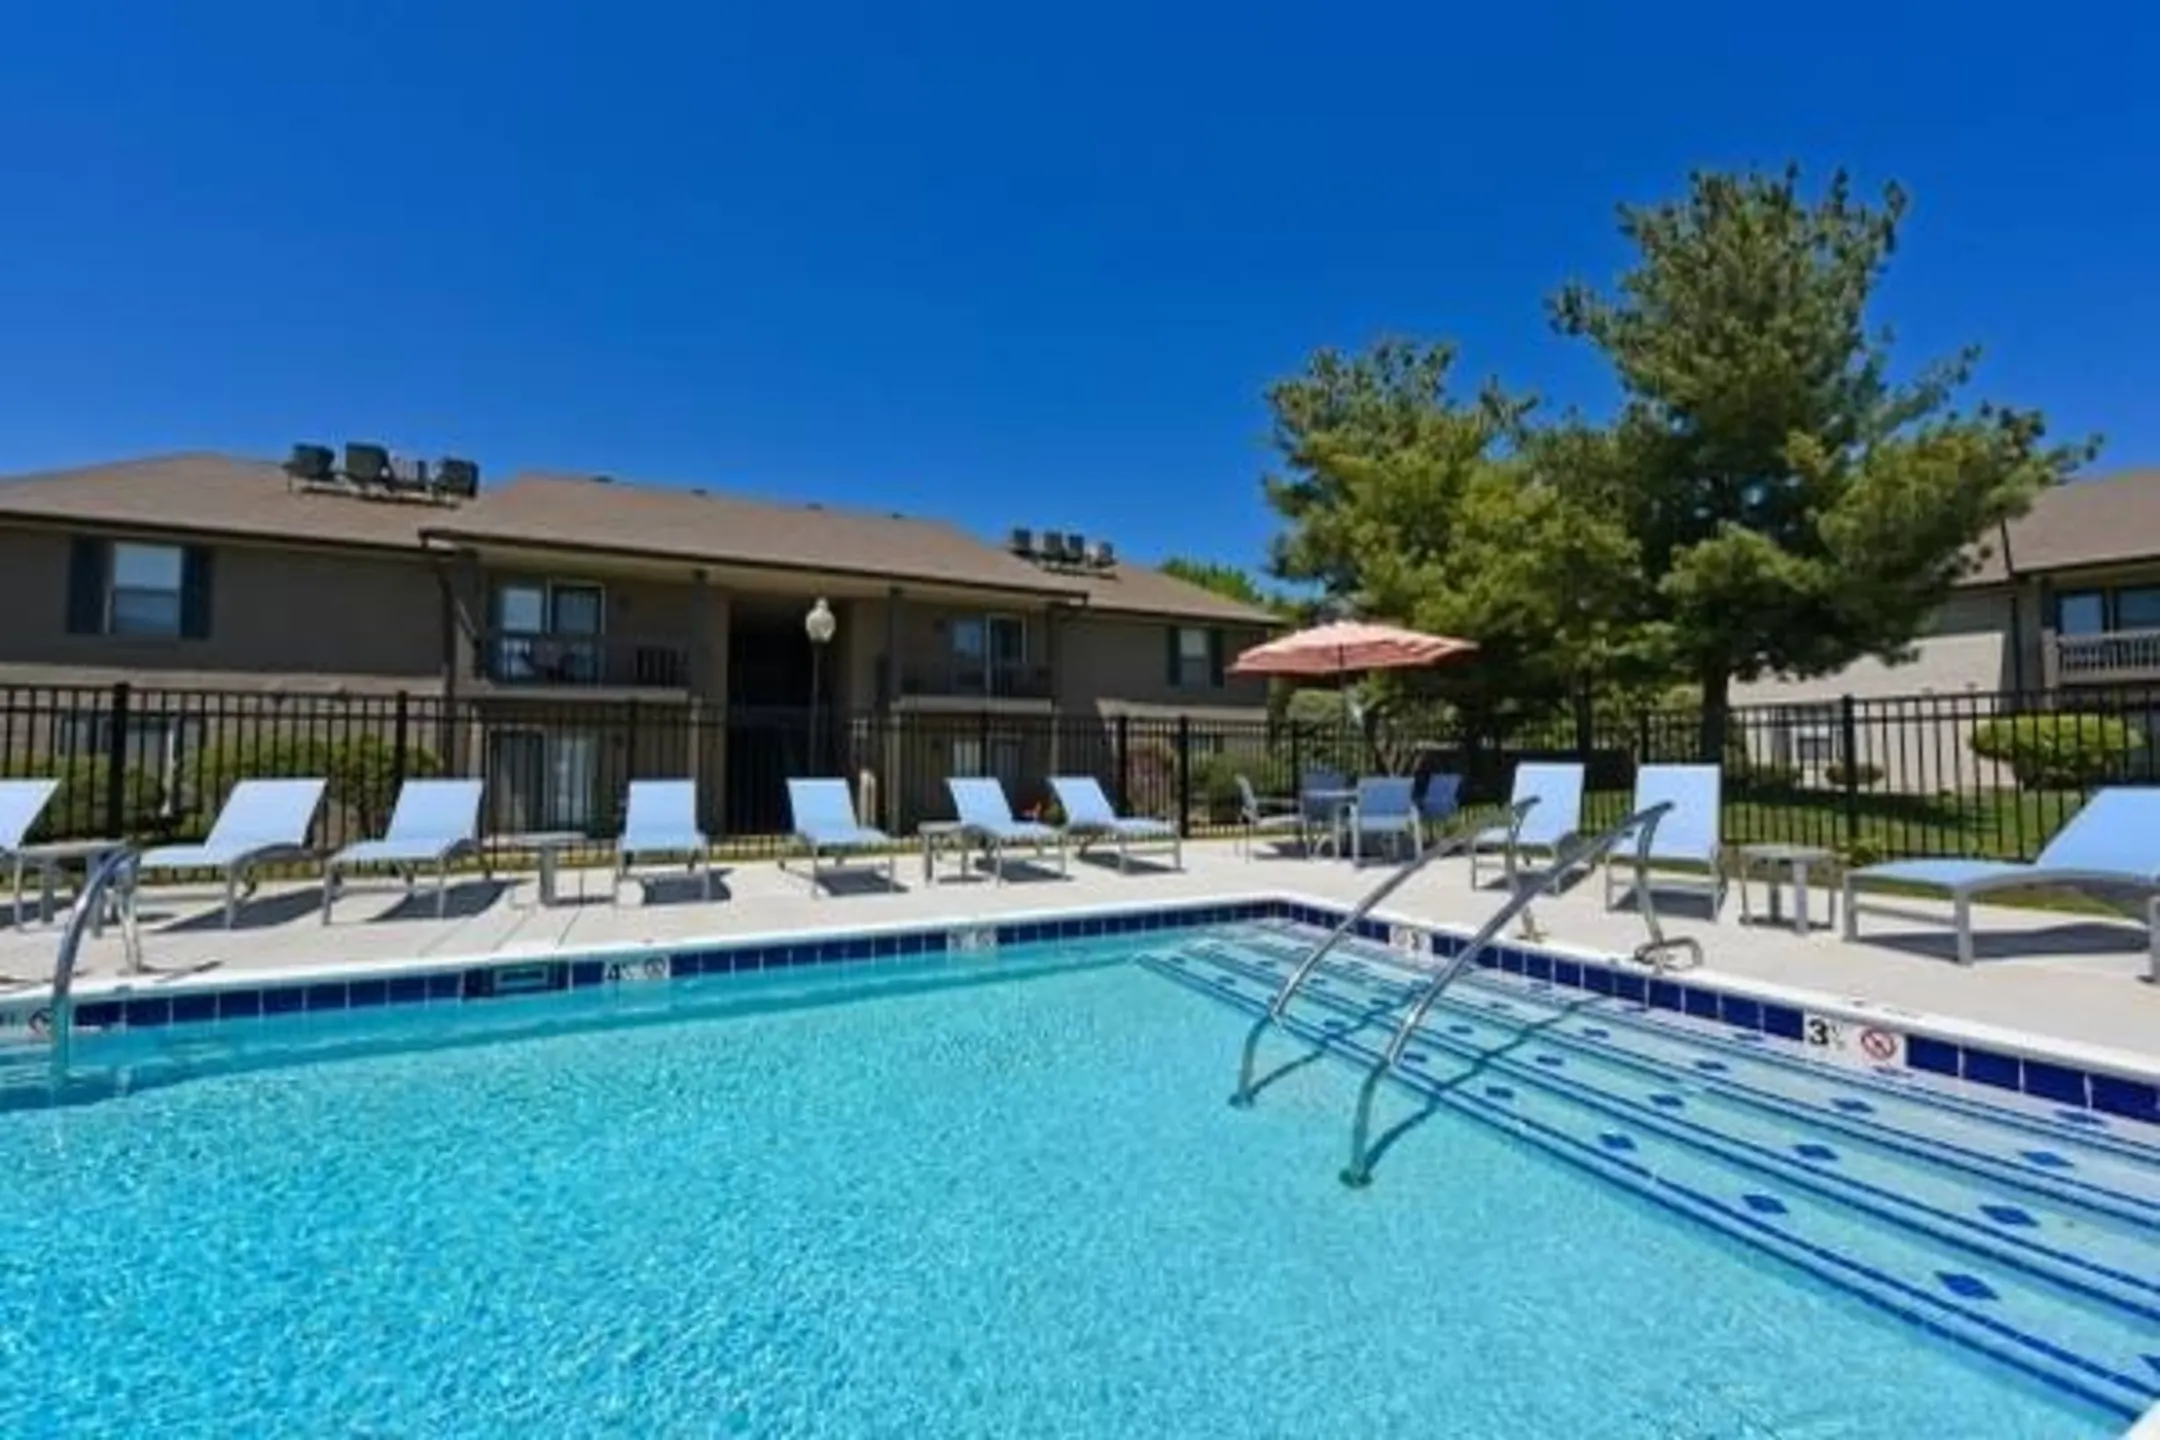 Pool - The Flats at Hurstbourne - Louisville, KY